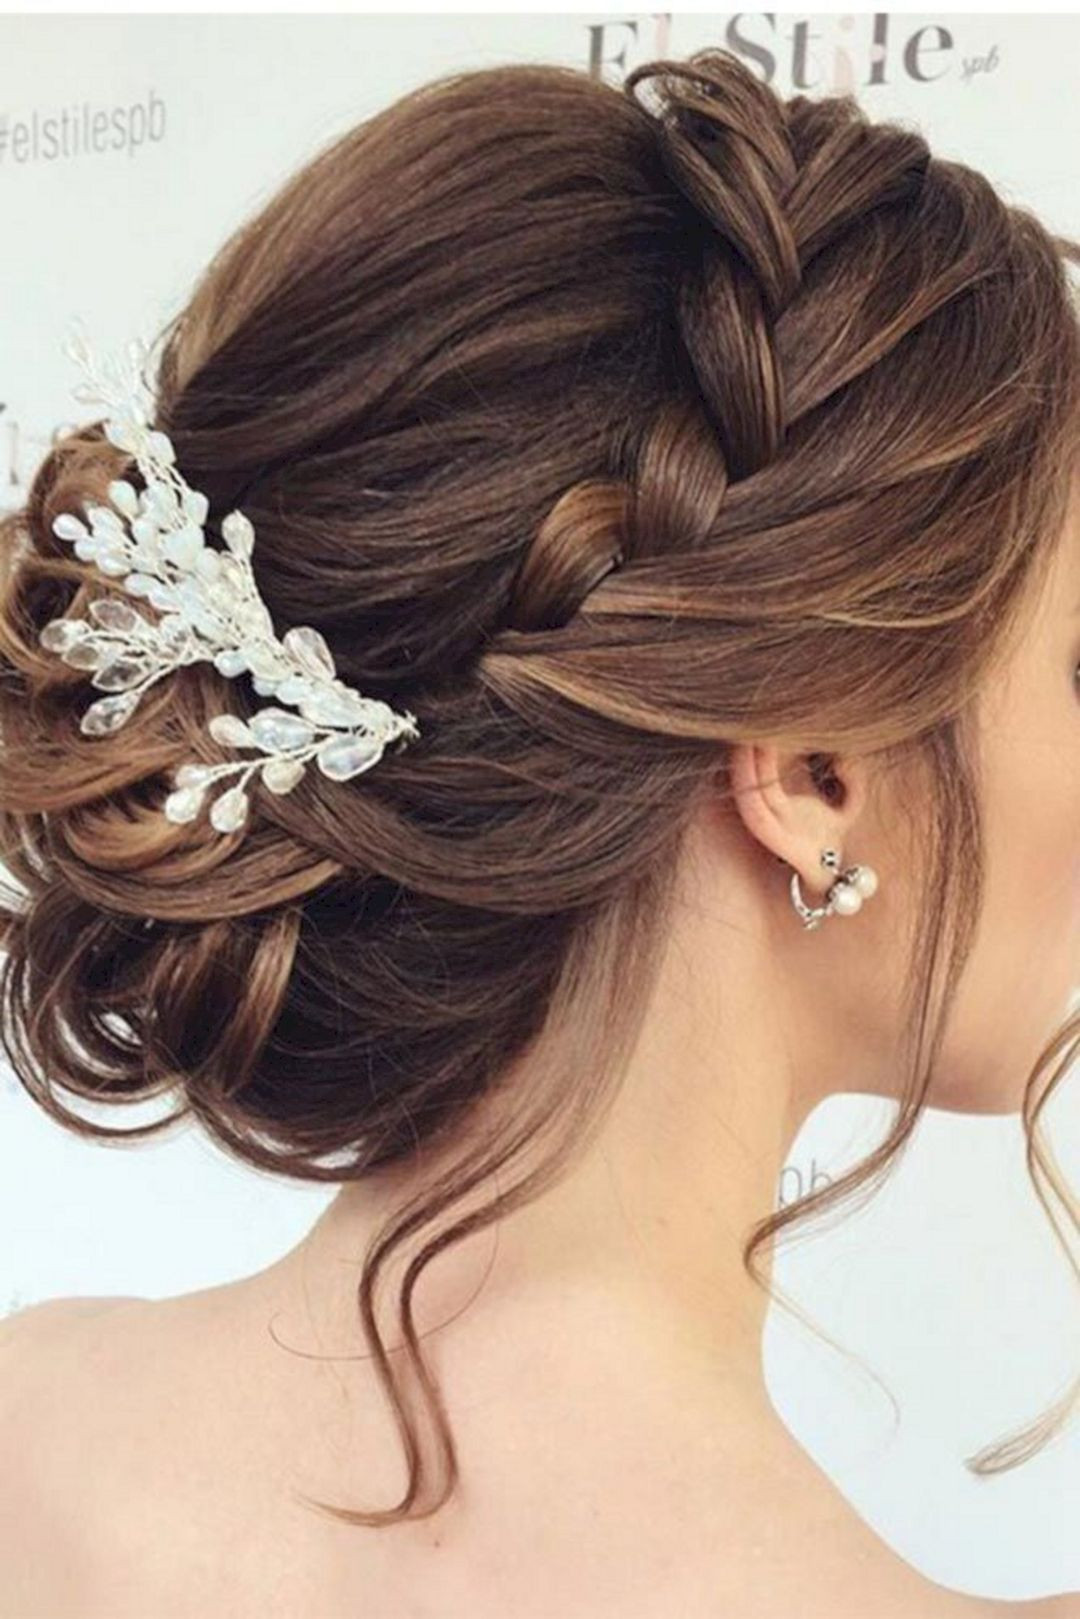 Wedding Hairstyles For Bridesmaids With Long Hair
 Bridesmaid Updo Hairstyles Long Hair – OOSILE